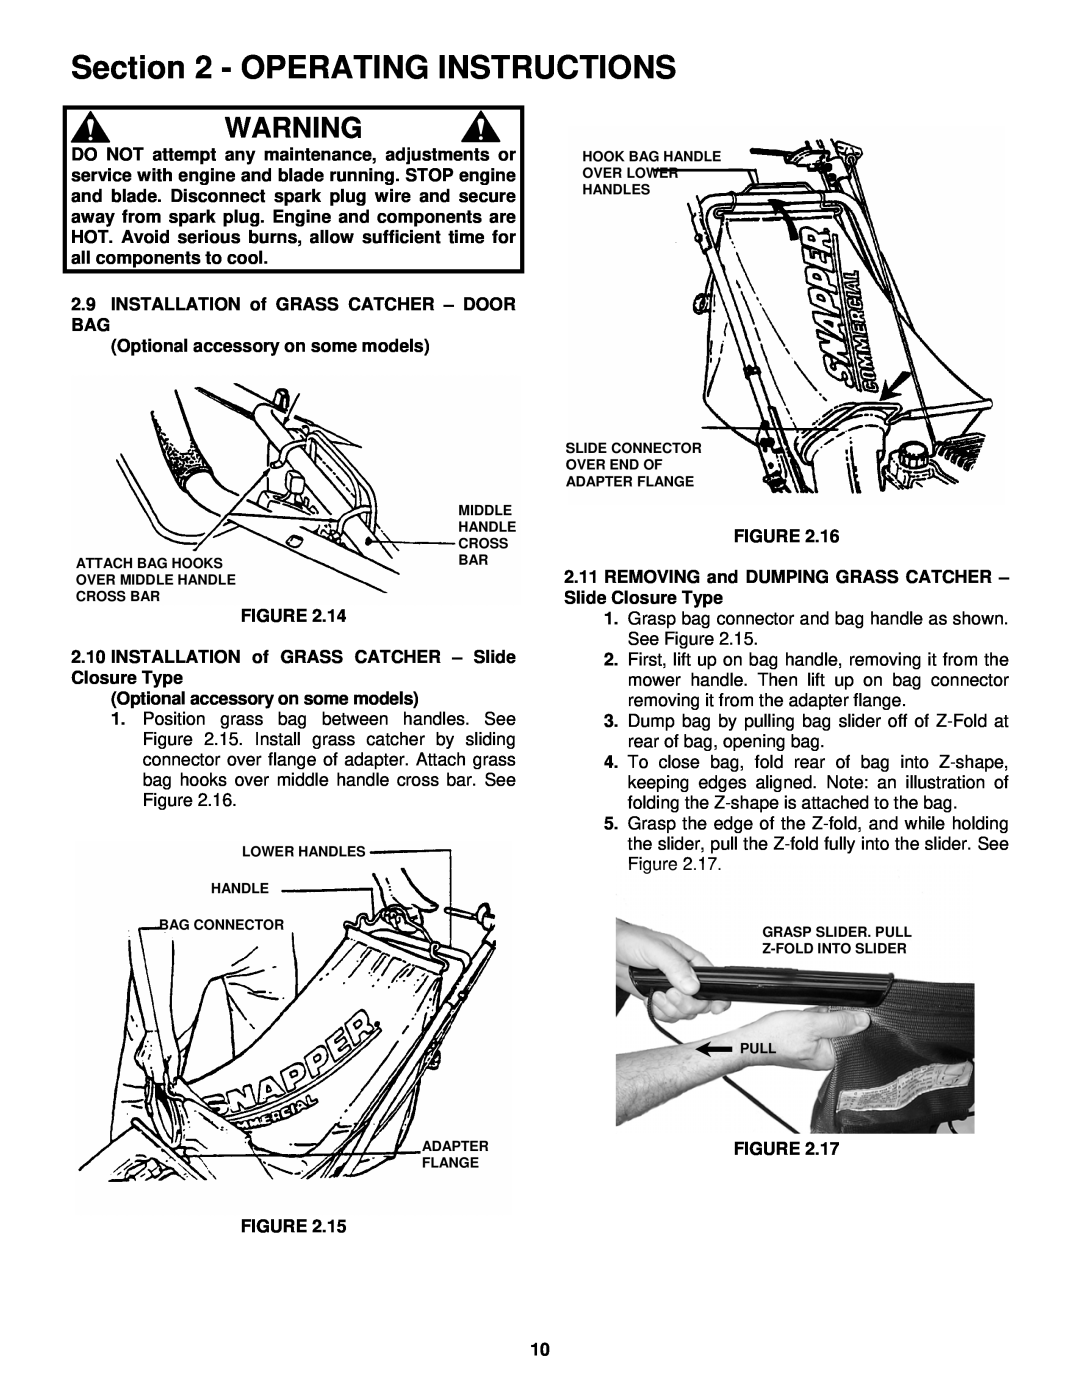 Snapper MR216517B, RP217017BV, RP215517HC Operating Instructions, Grasp bag connector and bag handle as shown. See Figure 